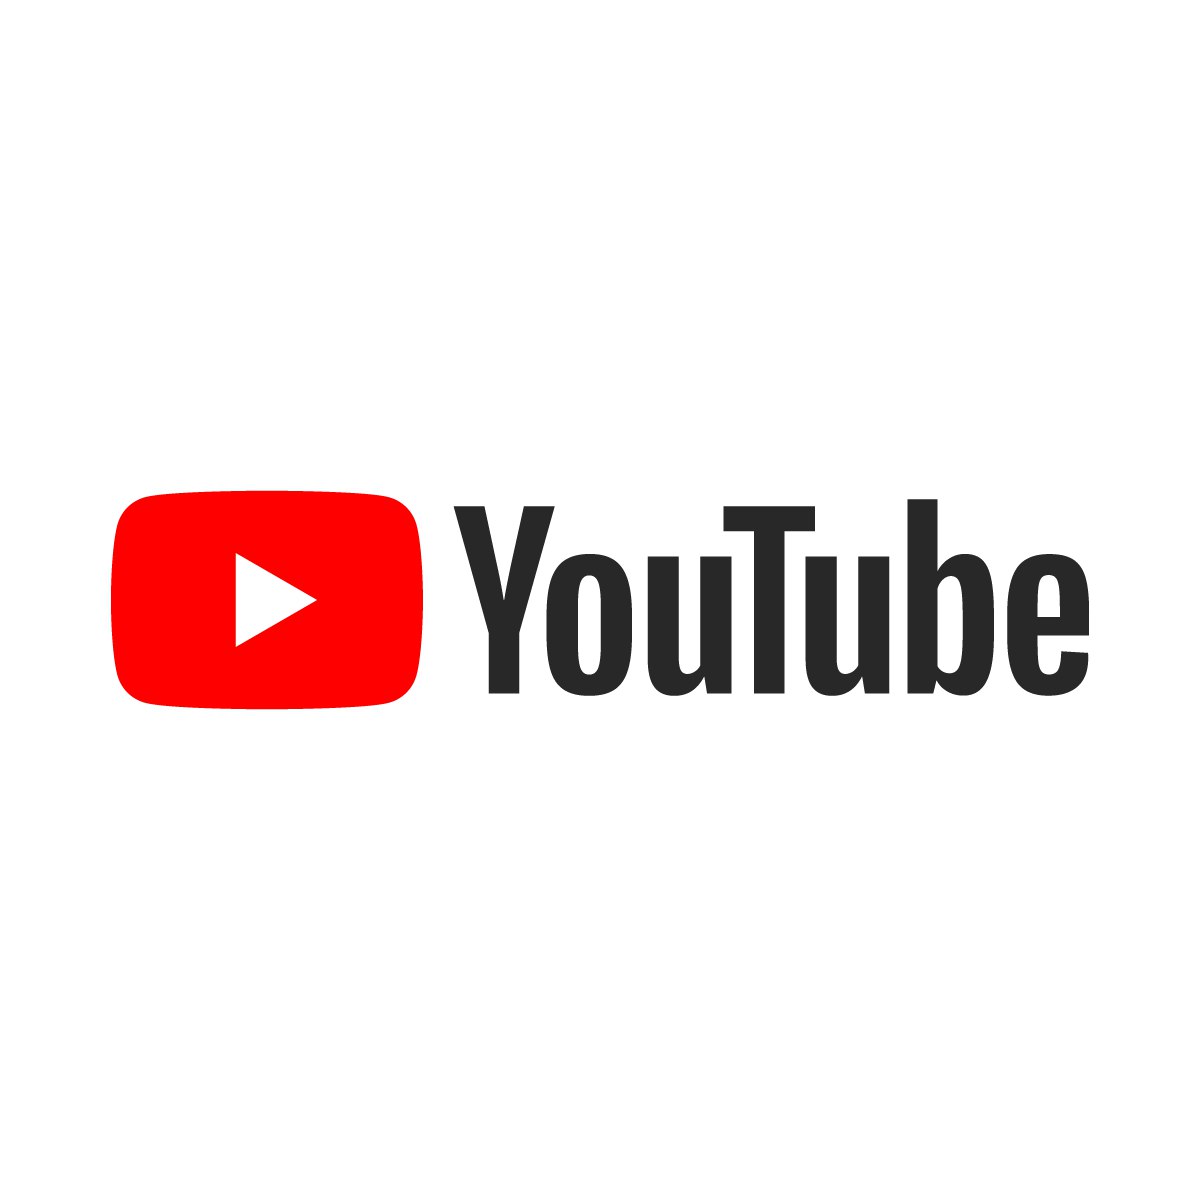 YouTube Rolls Out A Begging Tool For YouTubers